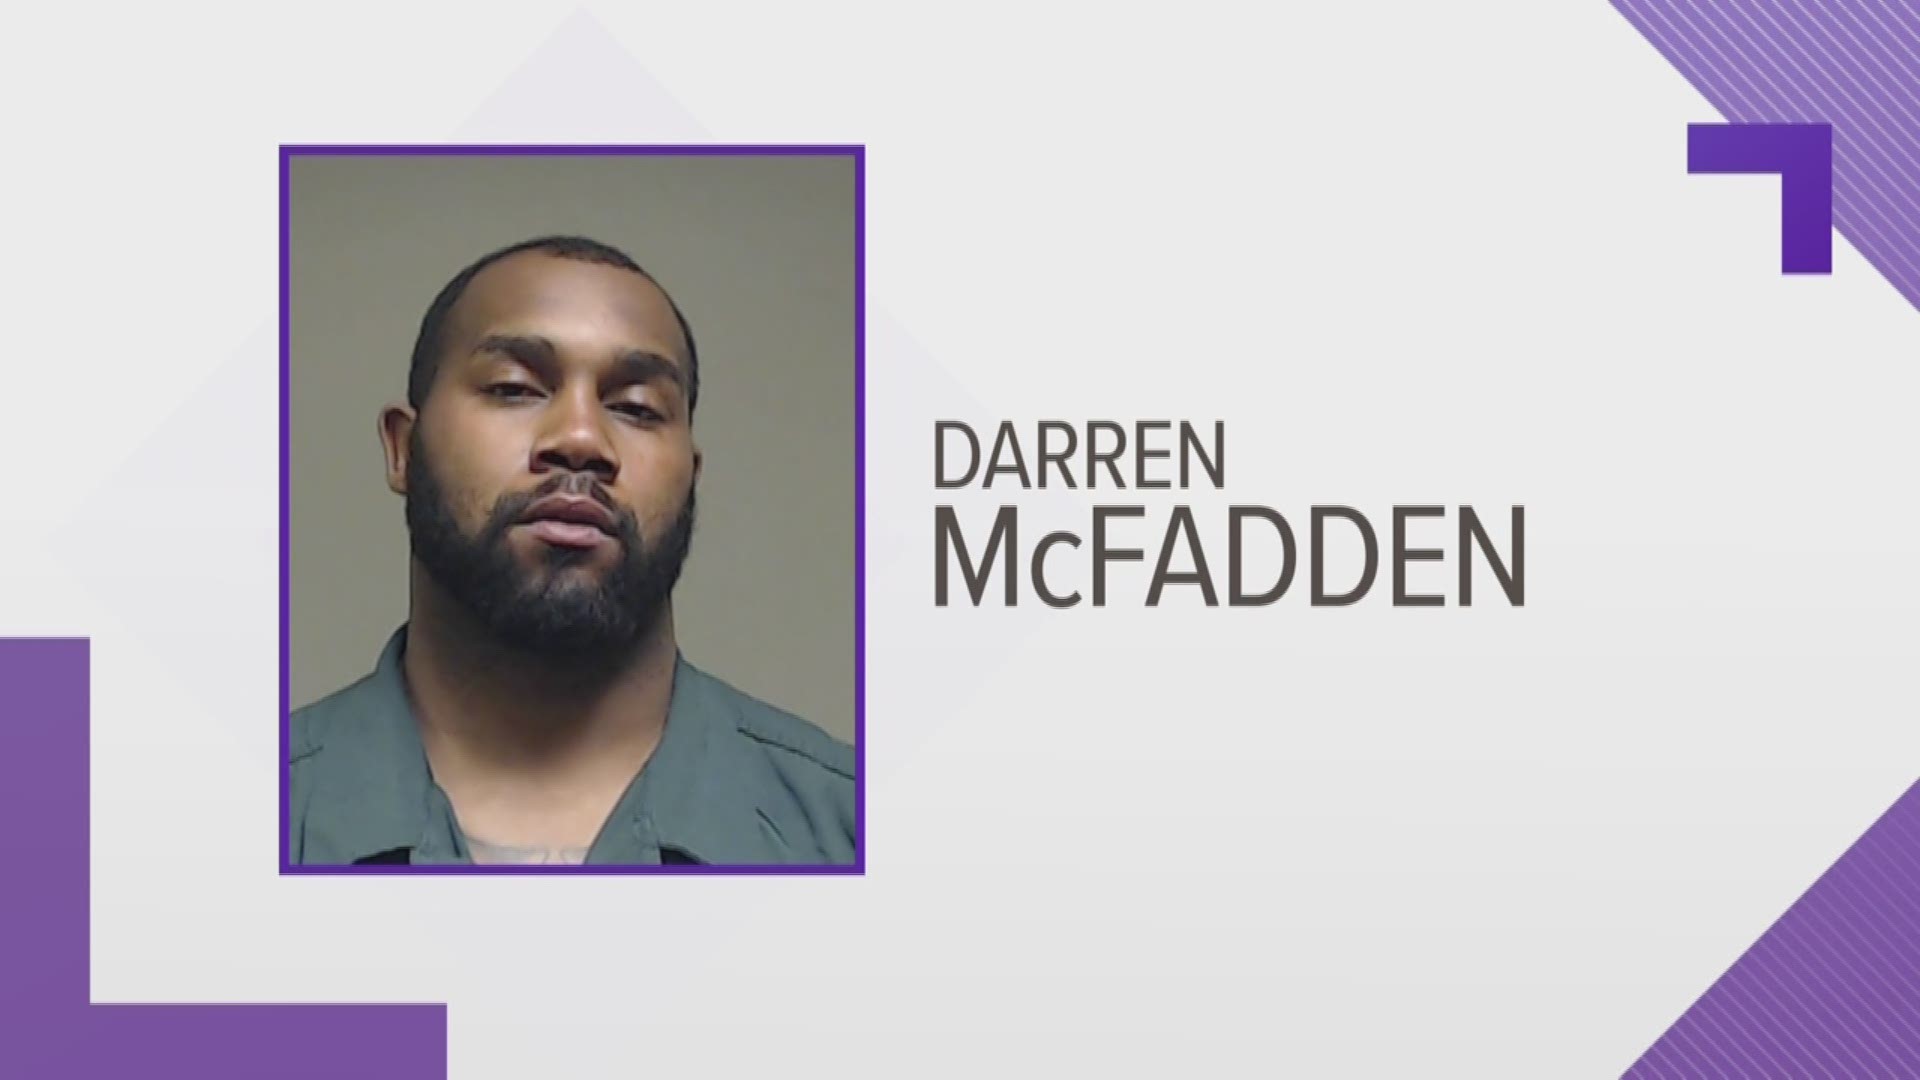 Former Razorback star Darren McFadden was arrested Jan. 21 for DWI in Collin County, Texas. TMZ reports he fell asleep in the drive-thru at a Whataburger.